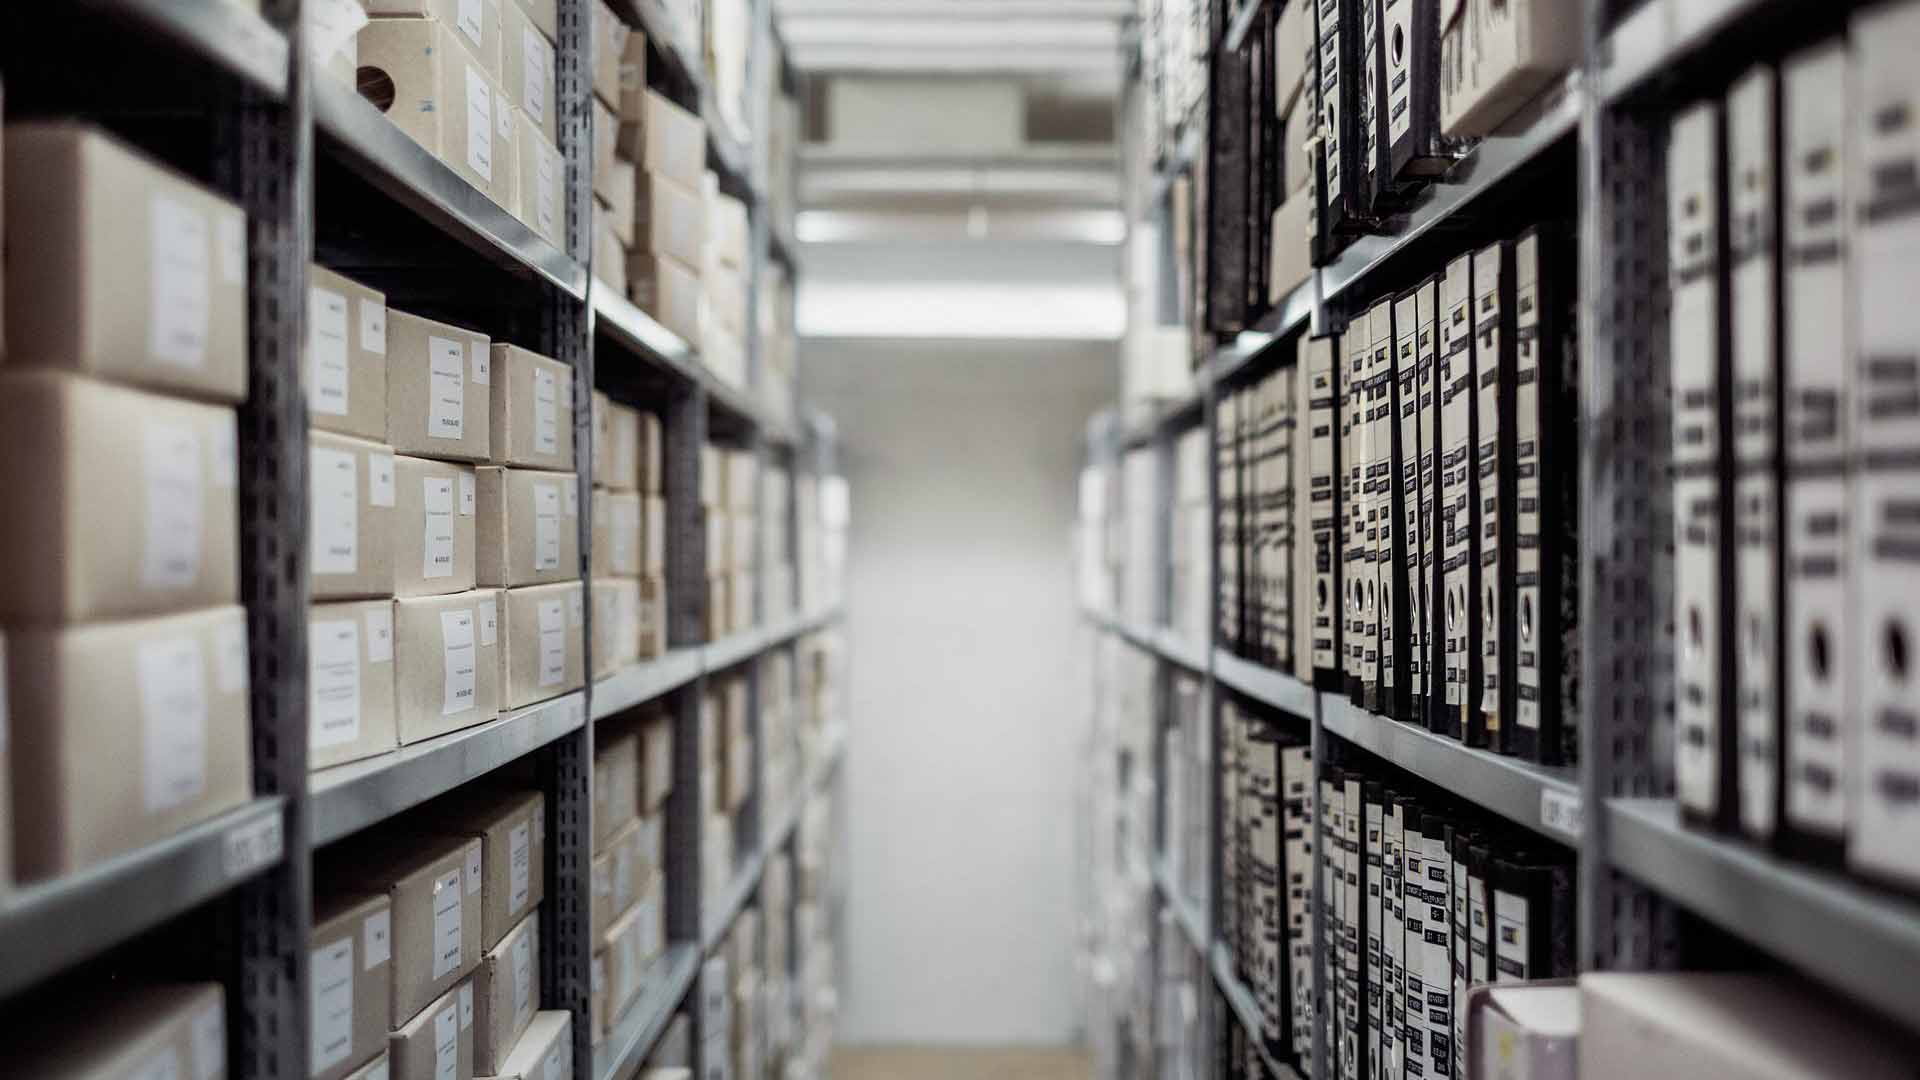 A government warehouse with archives of files on shelving